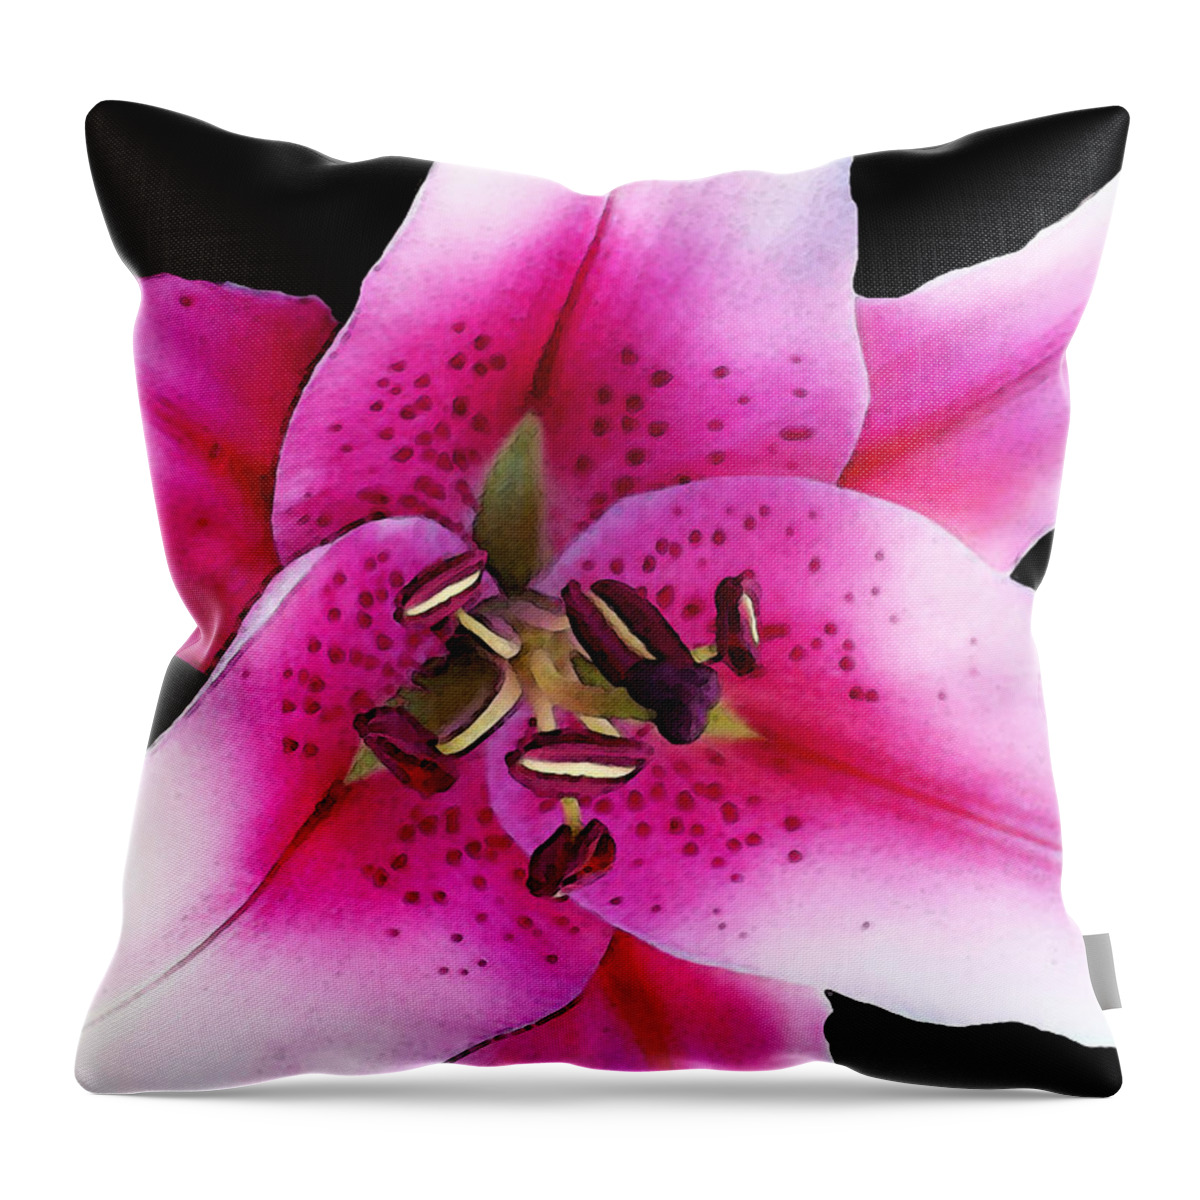 Lily Throw Pillow featuring the painting A Star Is Born - Pink Stargazer Lily by Sharon Cummings by Sharon Cummings